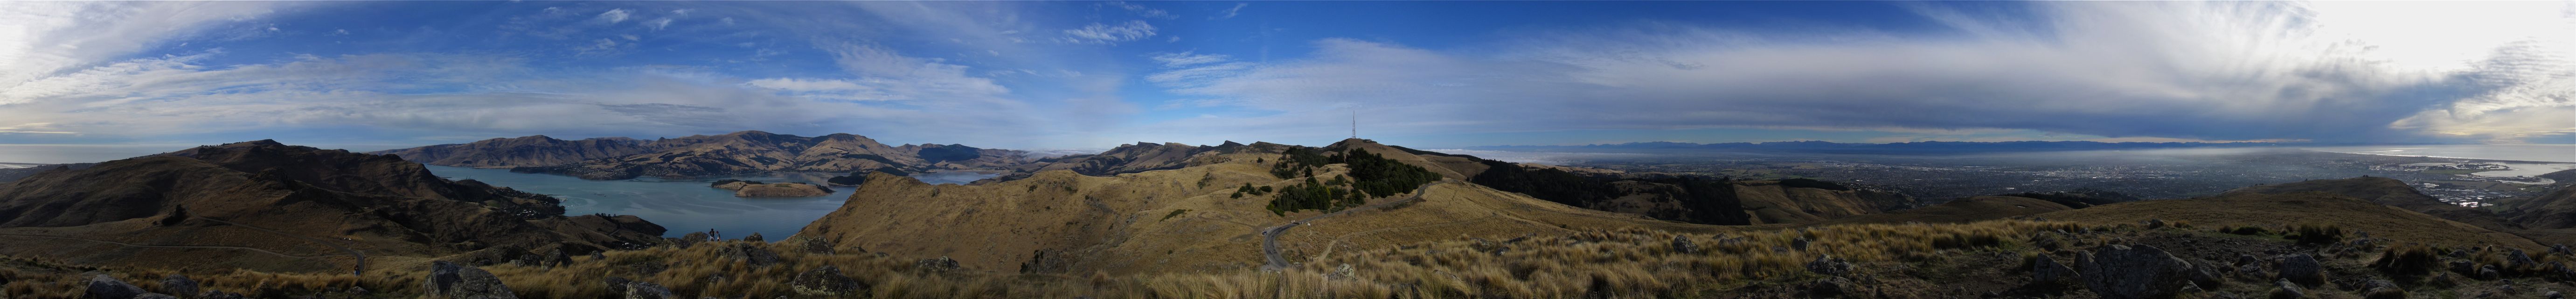 View from Mt Vernon (462m), Port Hills